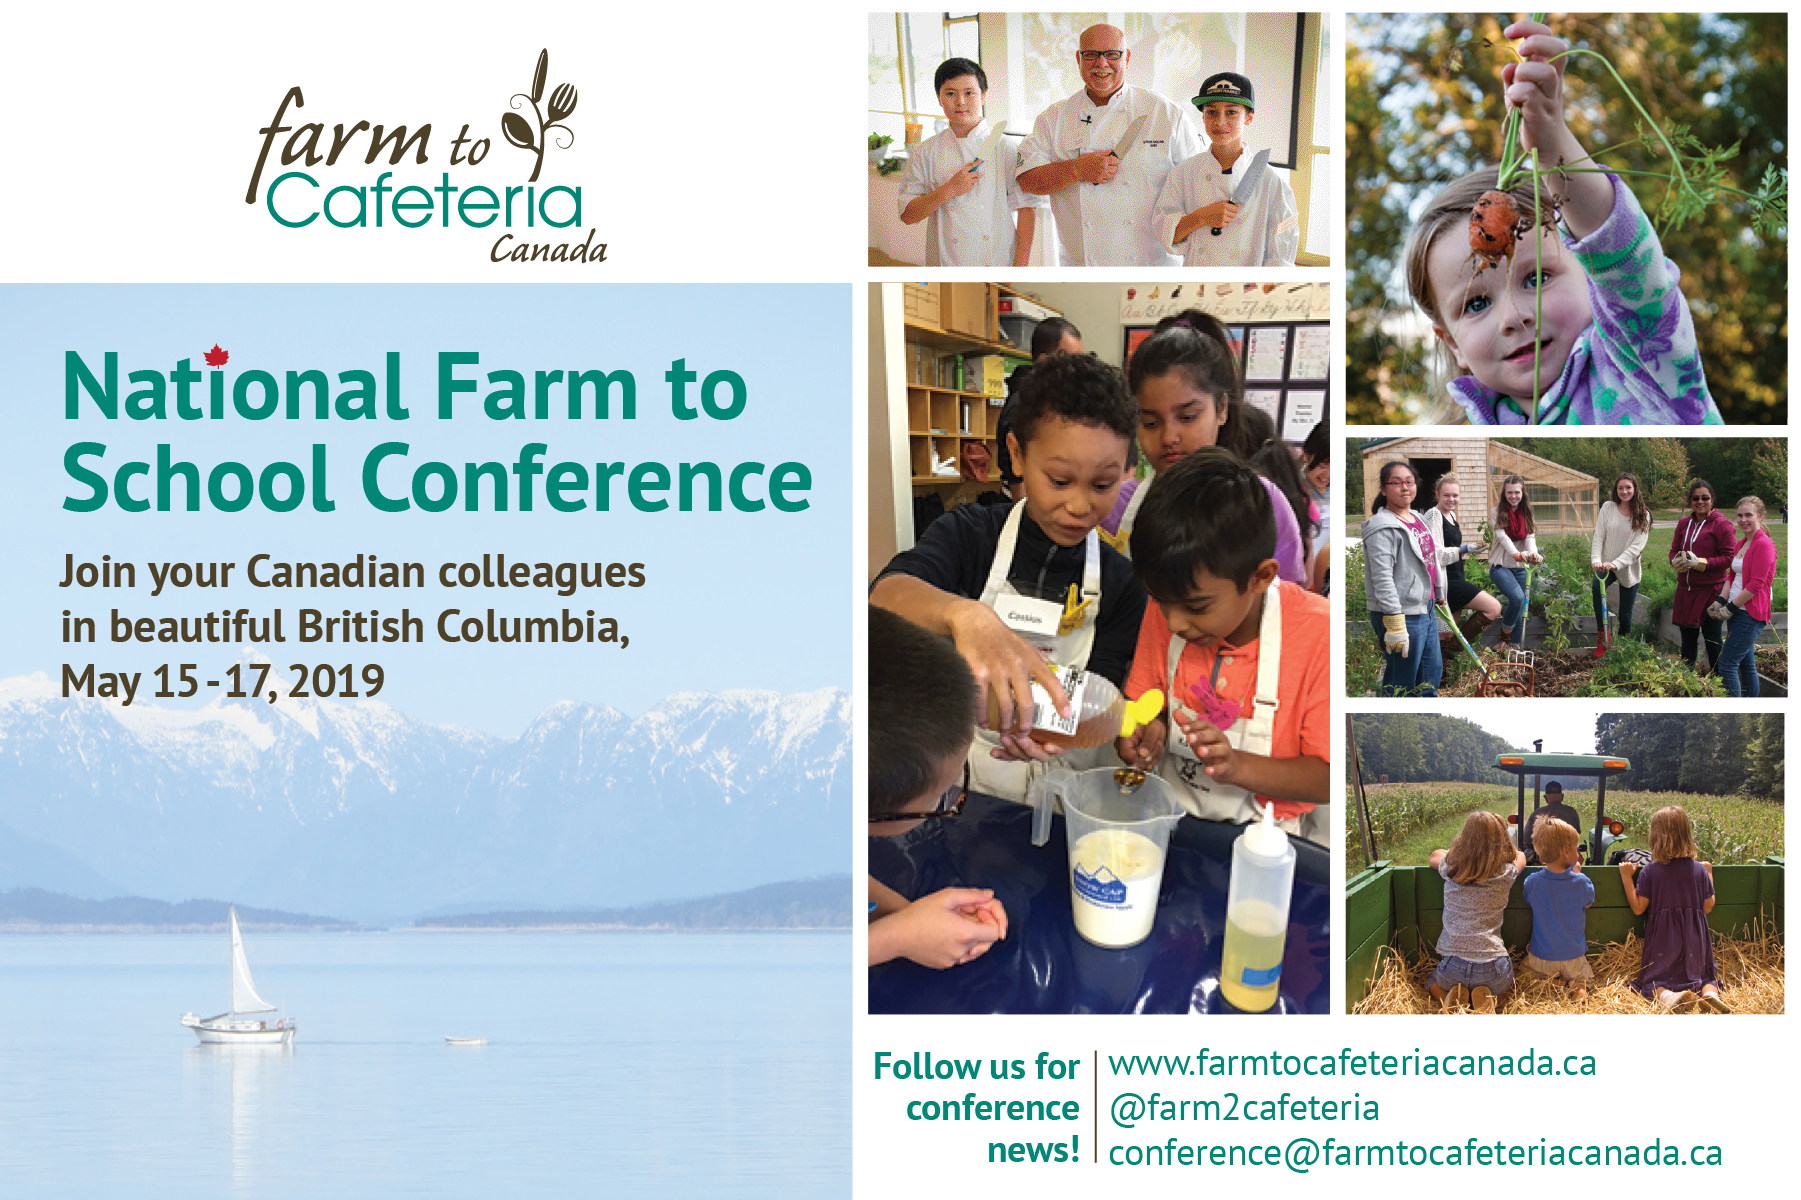 National Farm to School Conference